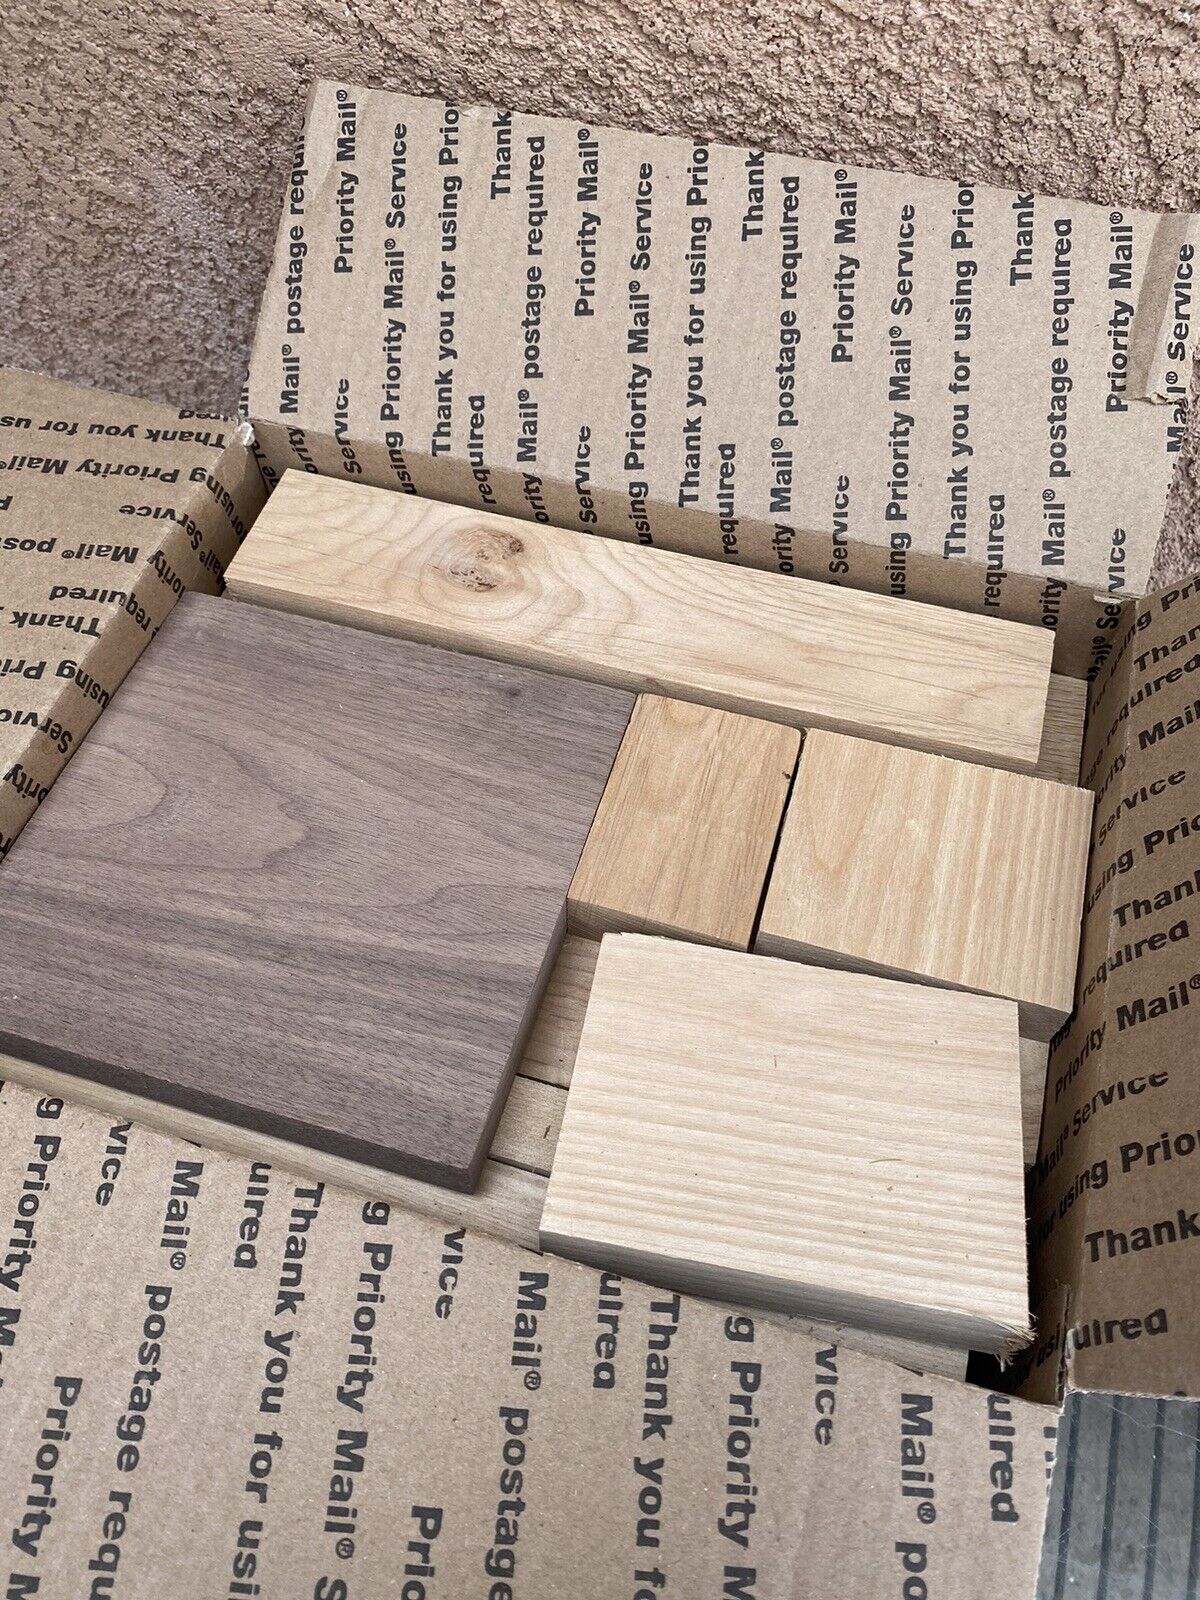 Variety Hard Wood Scraps Cutting Boards Crafts Creative No Knots Med USPS Boxful